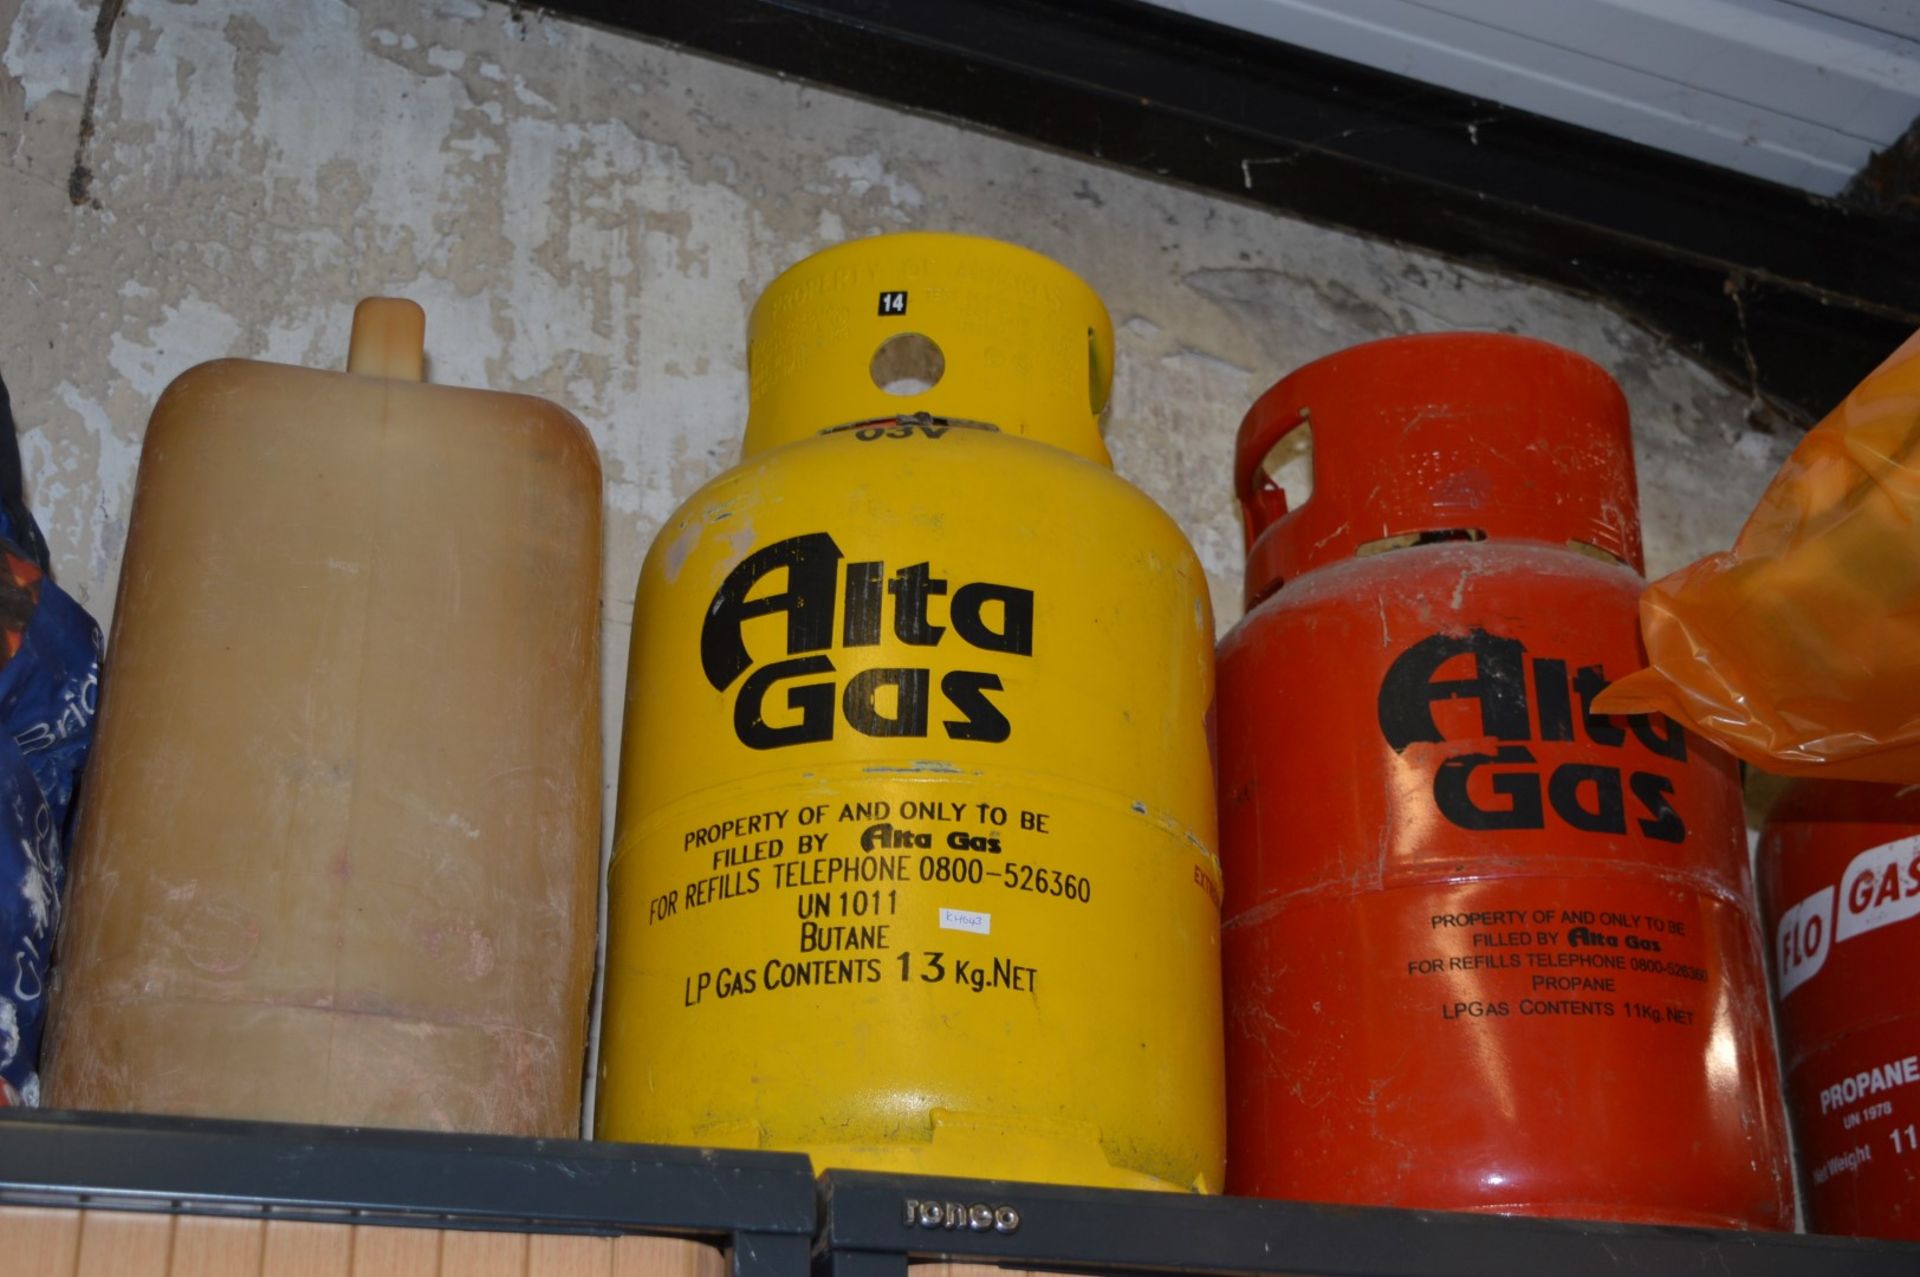 Assorted Lot - Includes 2 Sacks of Coal and 3 Gas Bottles - Ref: KH043 / SHD - CL168 - Location: - Image 3 of 5